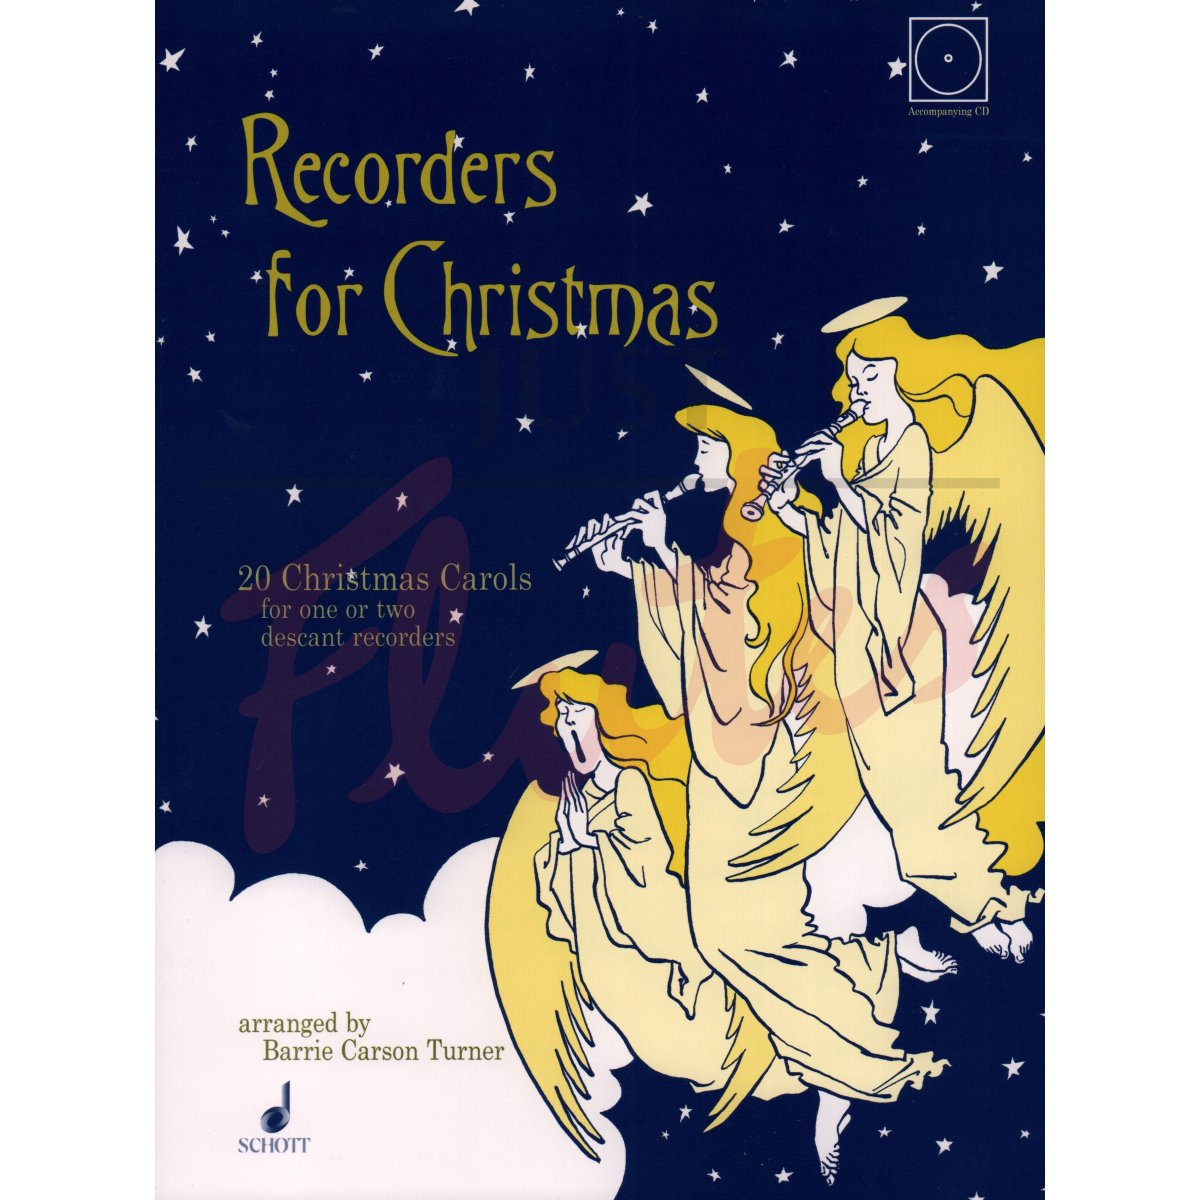 Recorders for Christmas - 20 Christmas Carols for 1 or 2 Descant Recorders